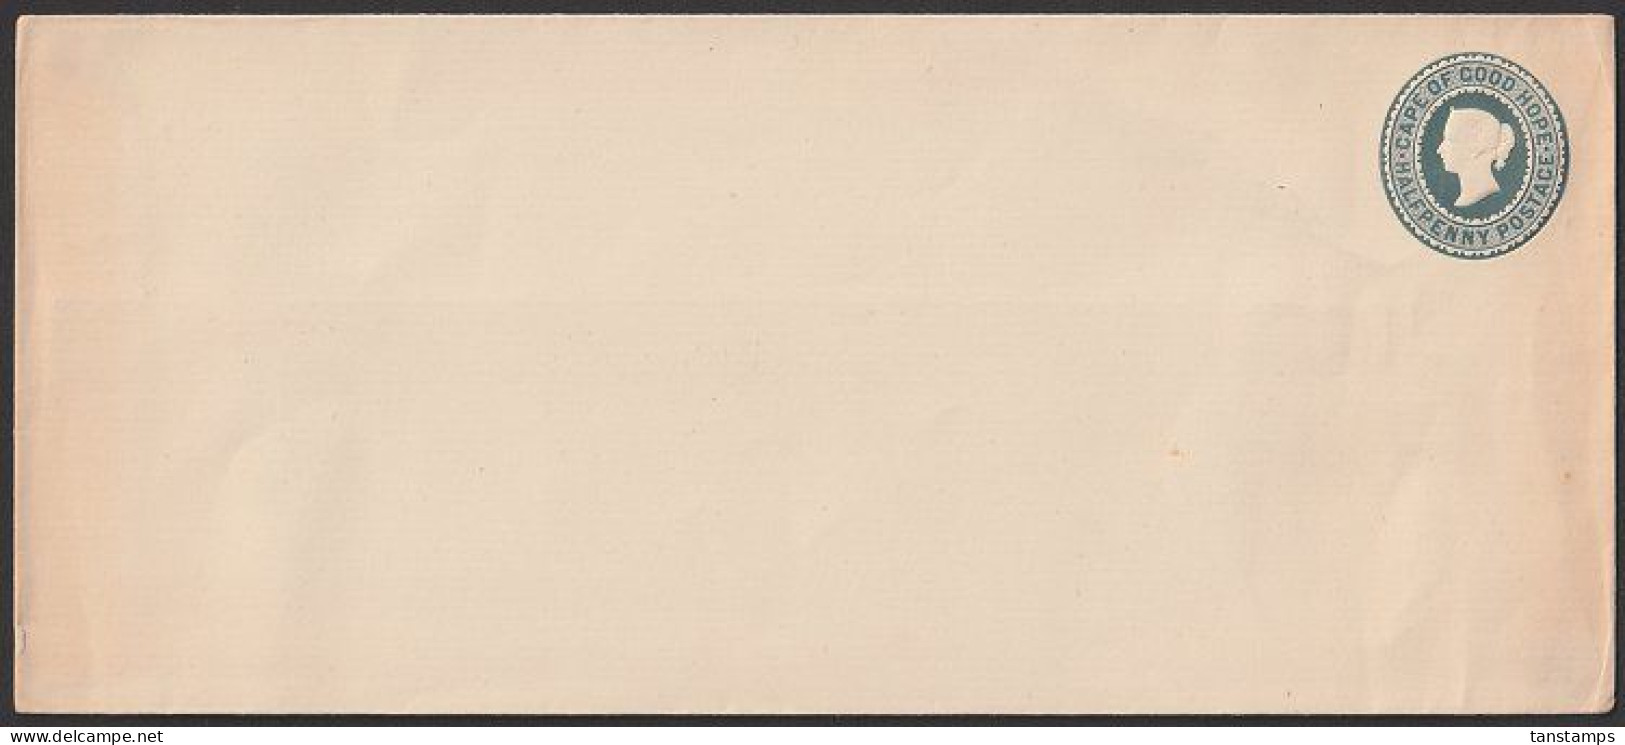 COGH QV HALFPENNY POSTAL STATIONERY COVER FORMAT F - Cape Of Good Hope (1853-1904)